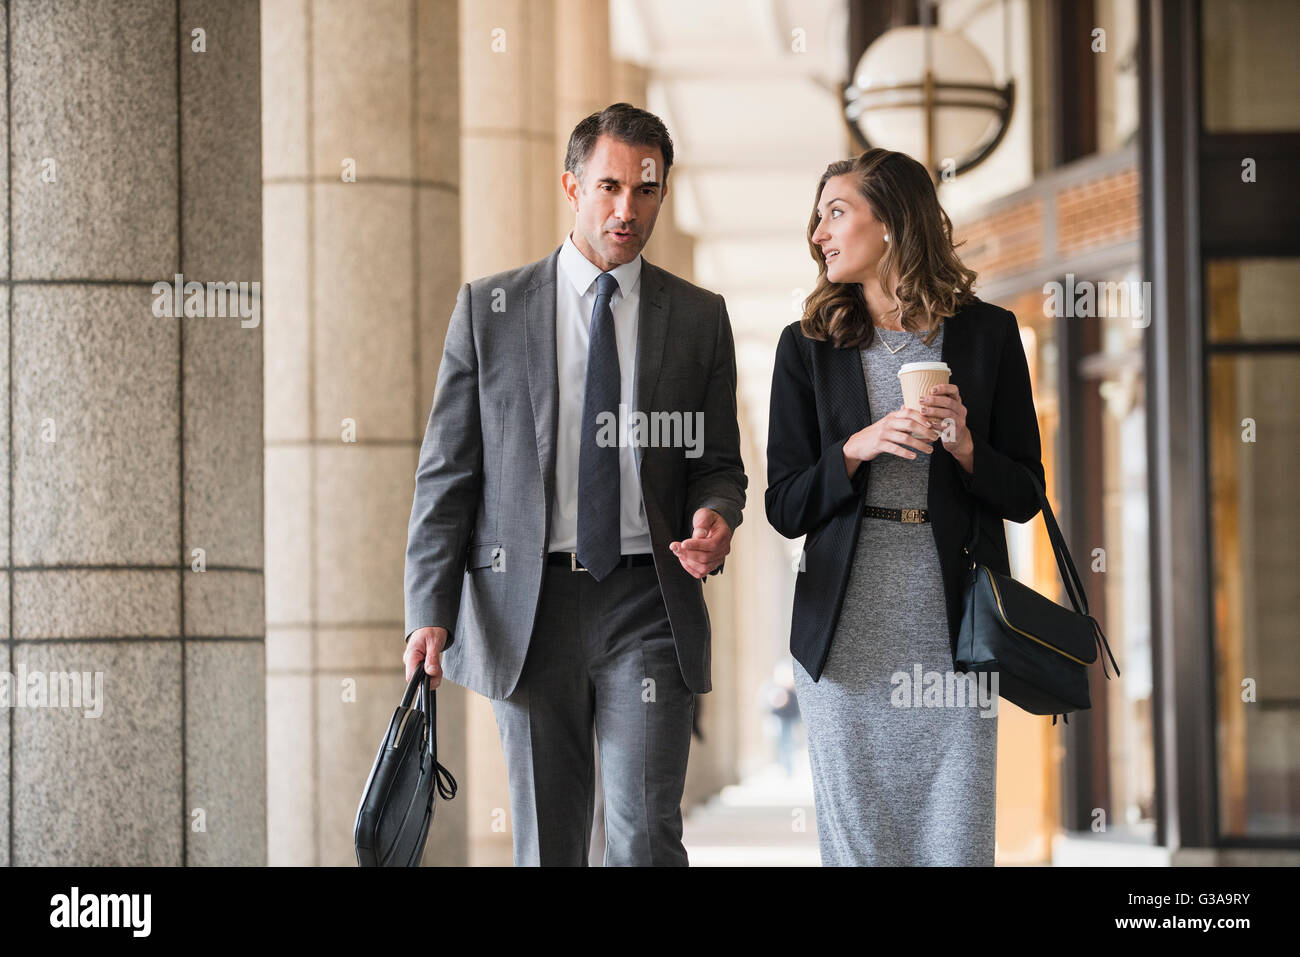 Corporate businessman and businesswoman with coffee walking and talking in cloister Stock Photo